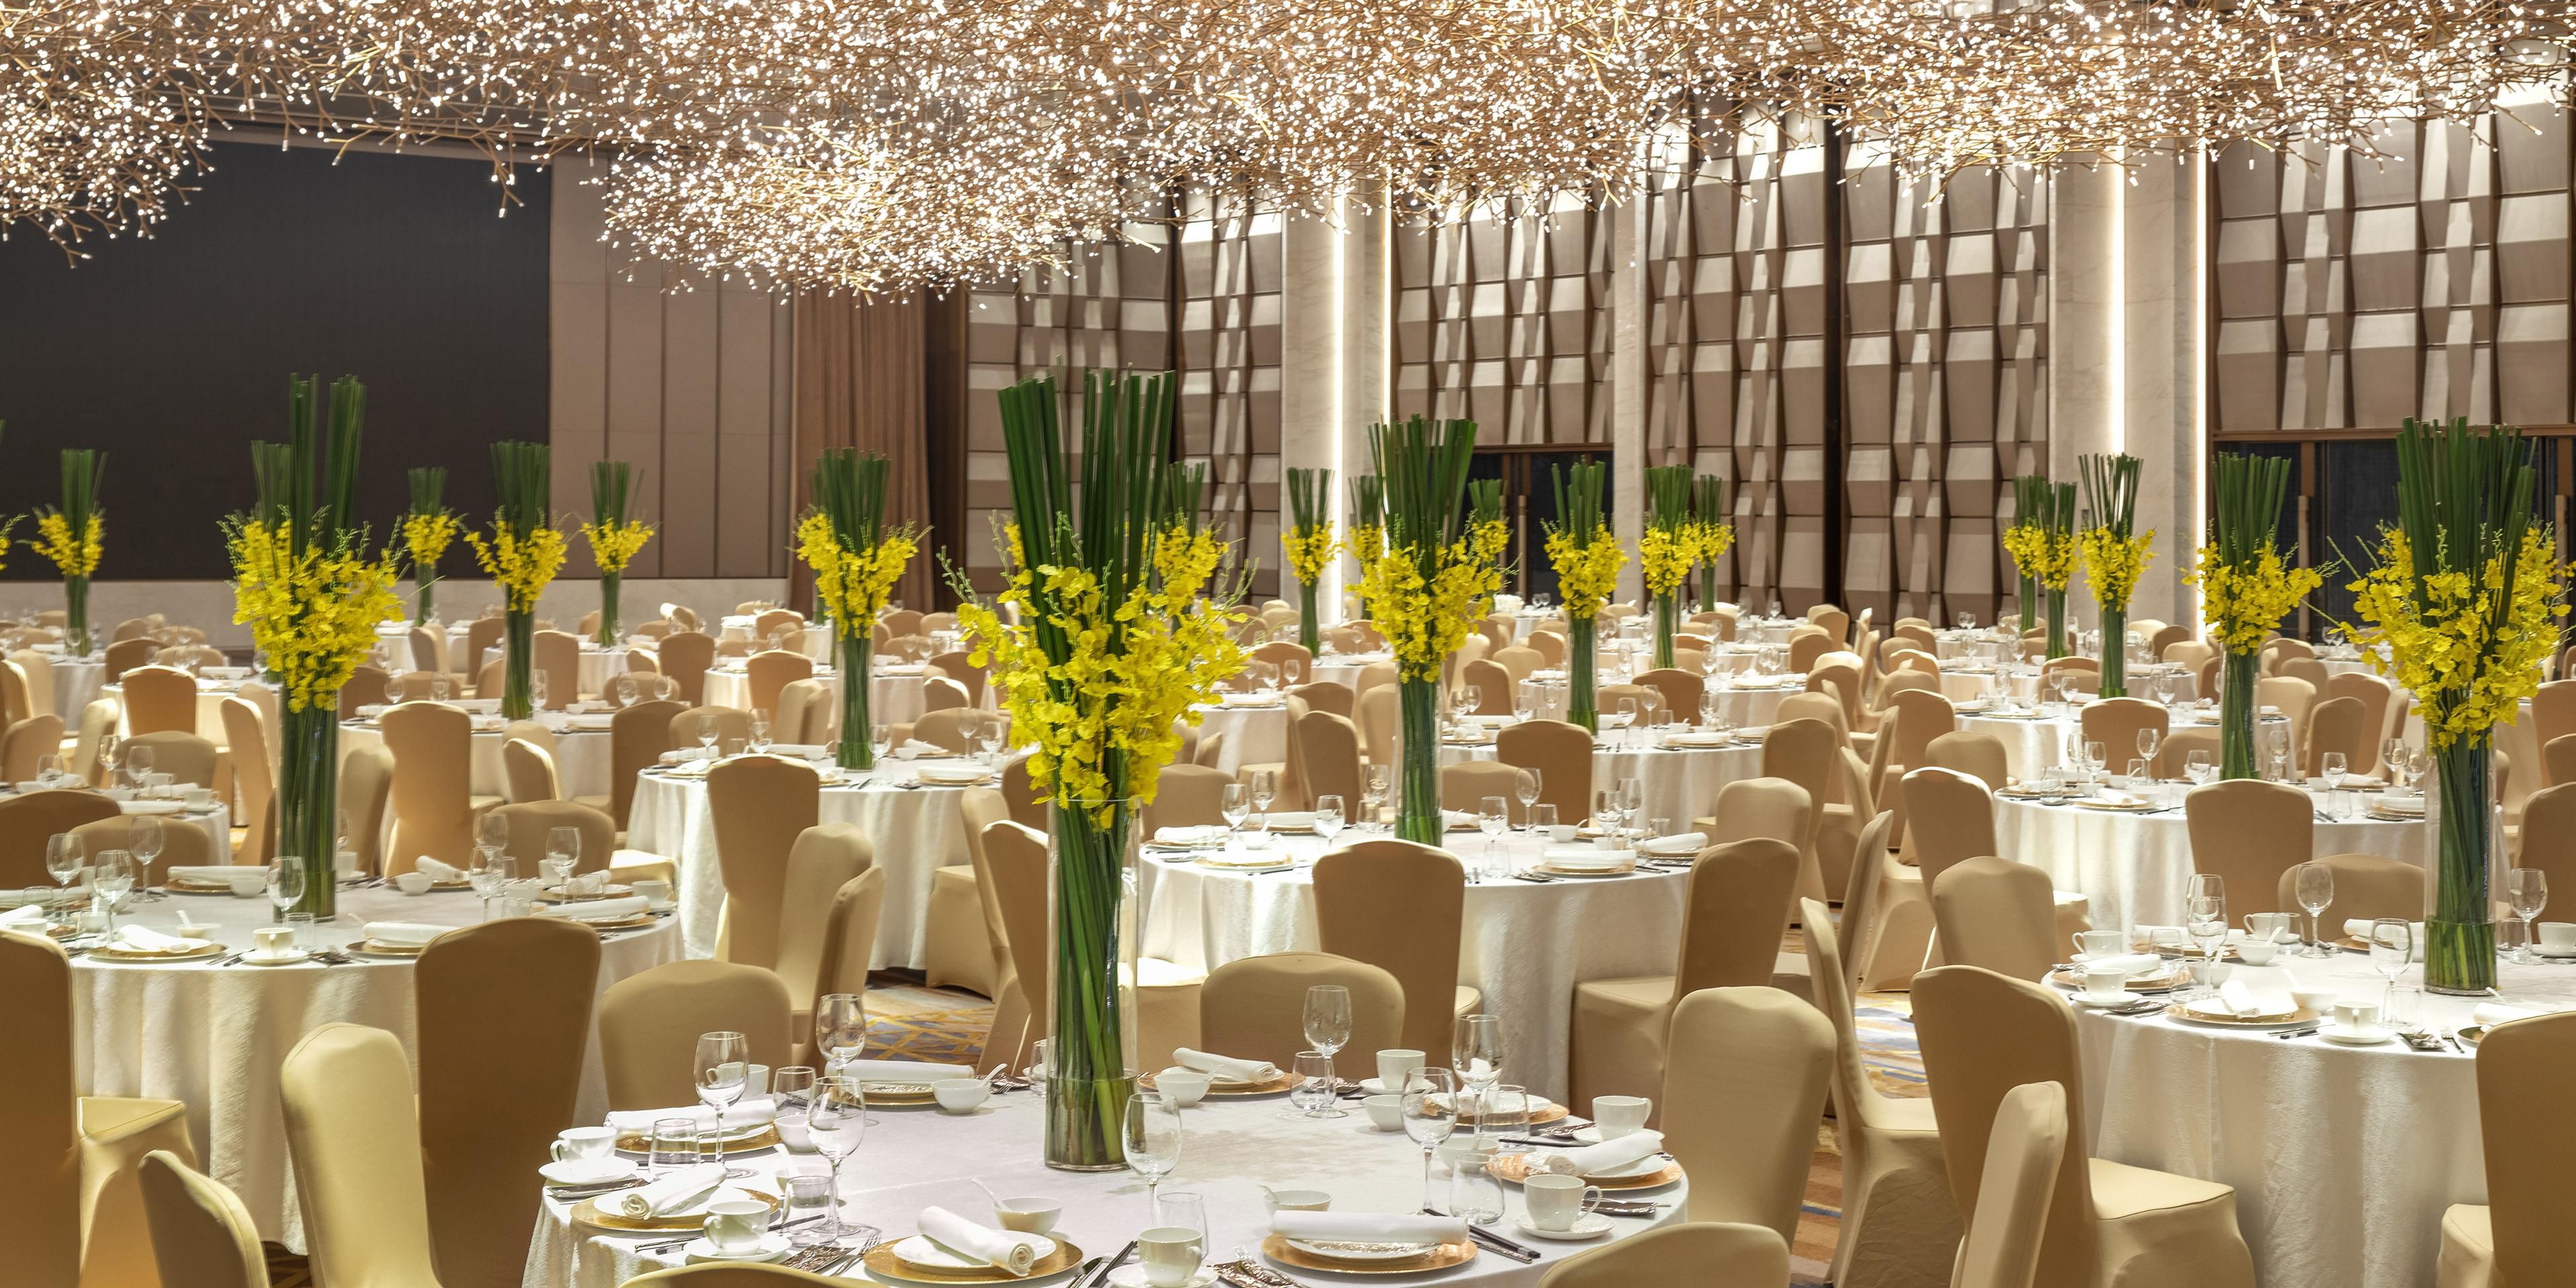 We feature approximately 16,000 square metres activity space, whether it's a magnificent Chinese or a romantic Western wedding or an unique rive view wedding, InterContinental is a wonderful venue to say "Yes, I Do".